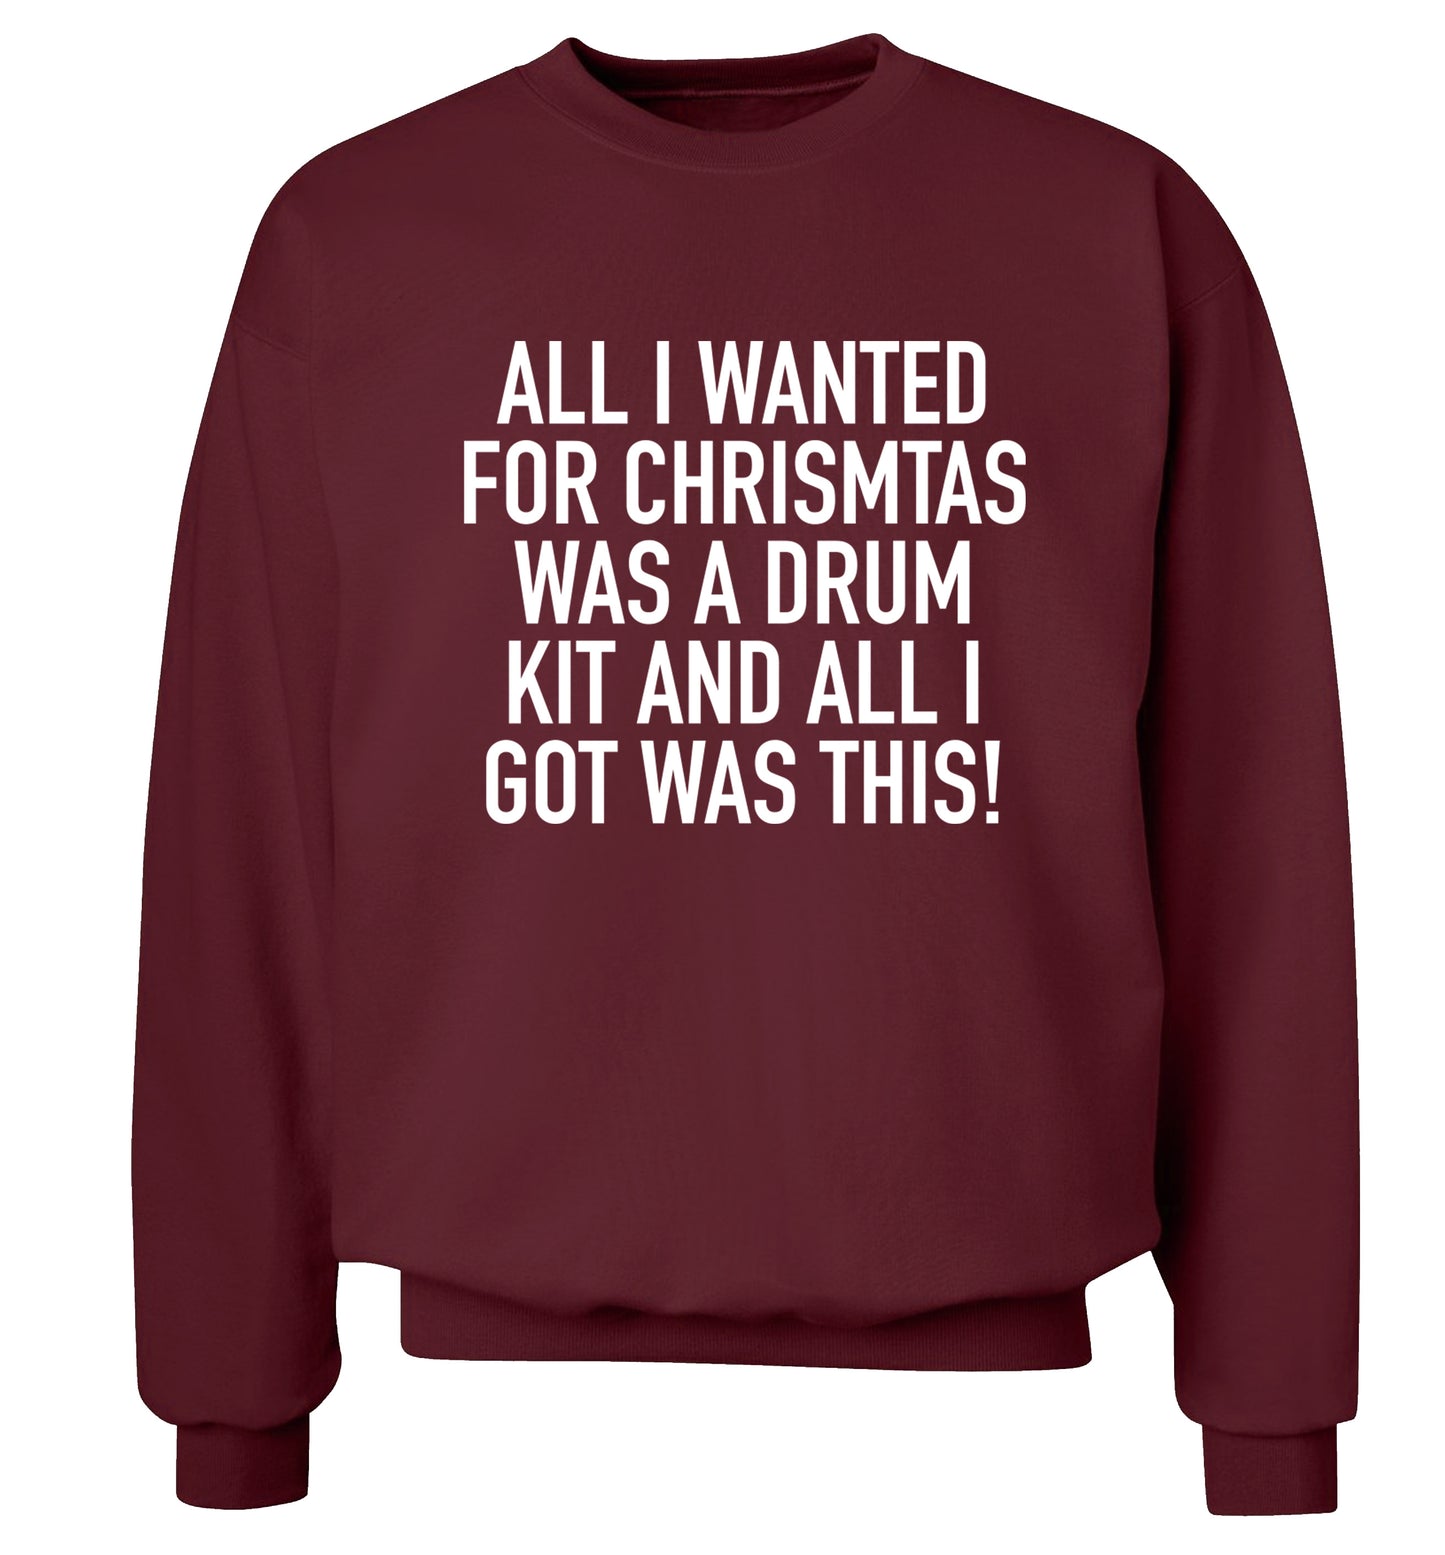 All I wanted for Christmas was a drum kit and all I got was this! Adult's unisex maroon Sweater 2XL